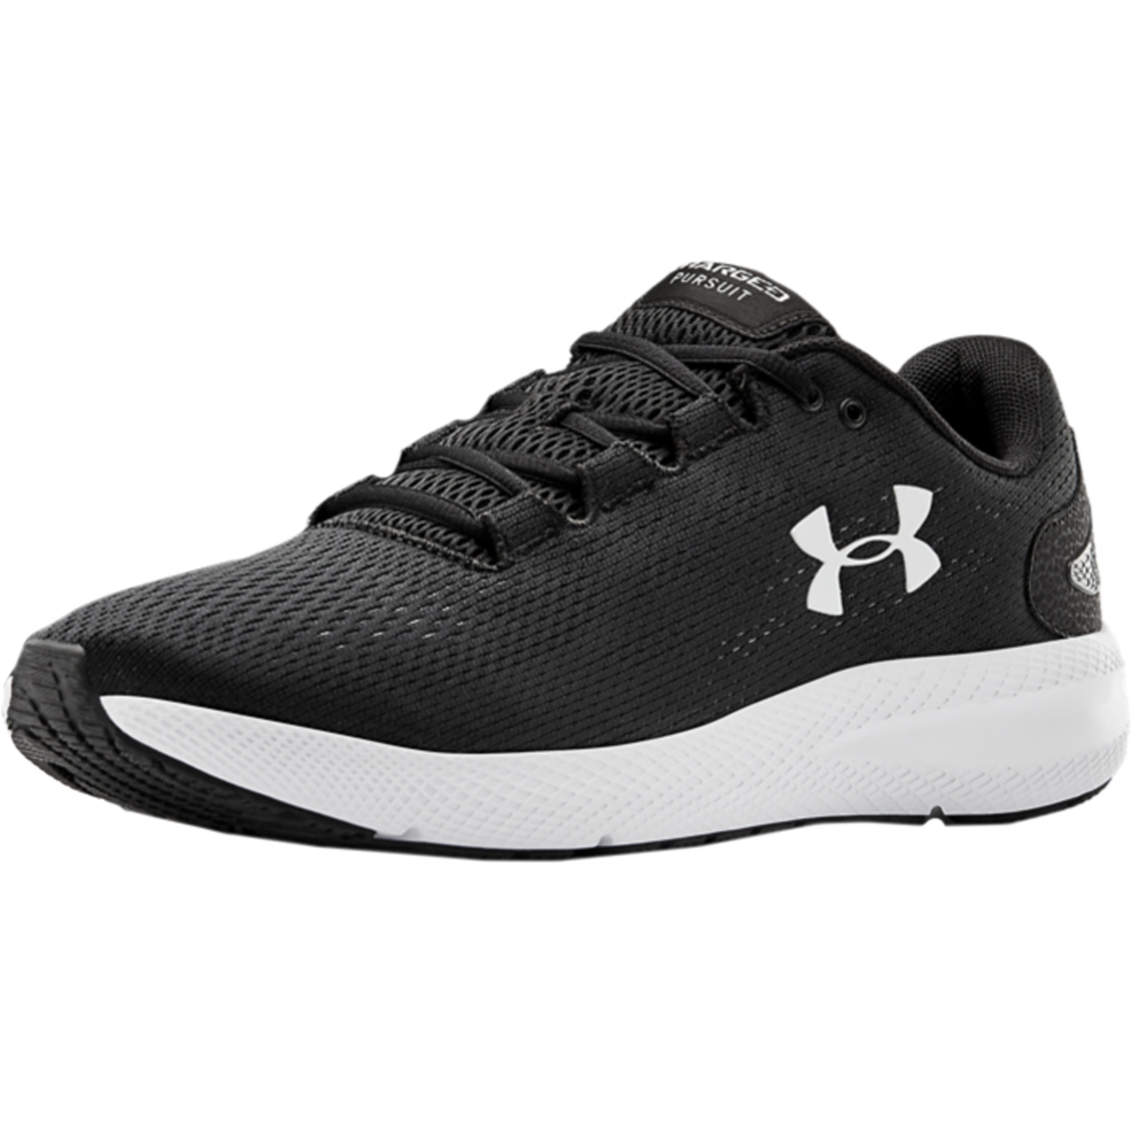 Under Armour Mens Charged Pursuit 2 Running Shoe